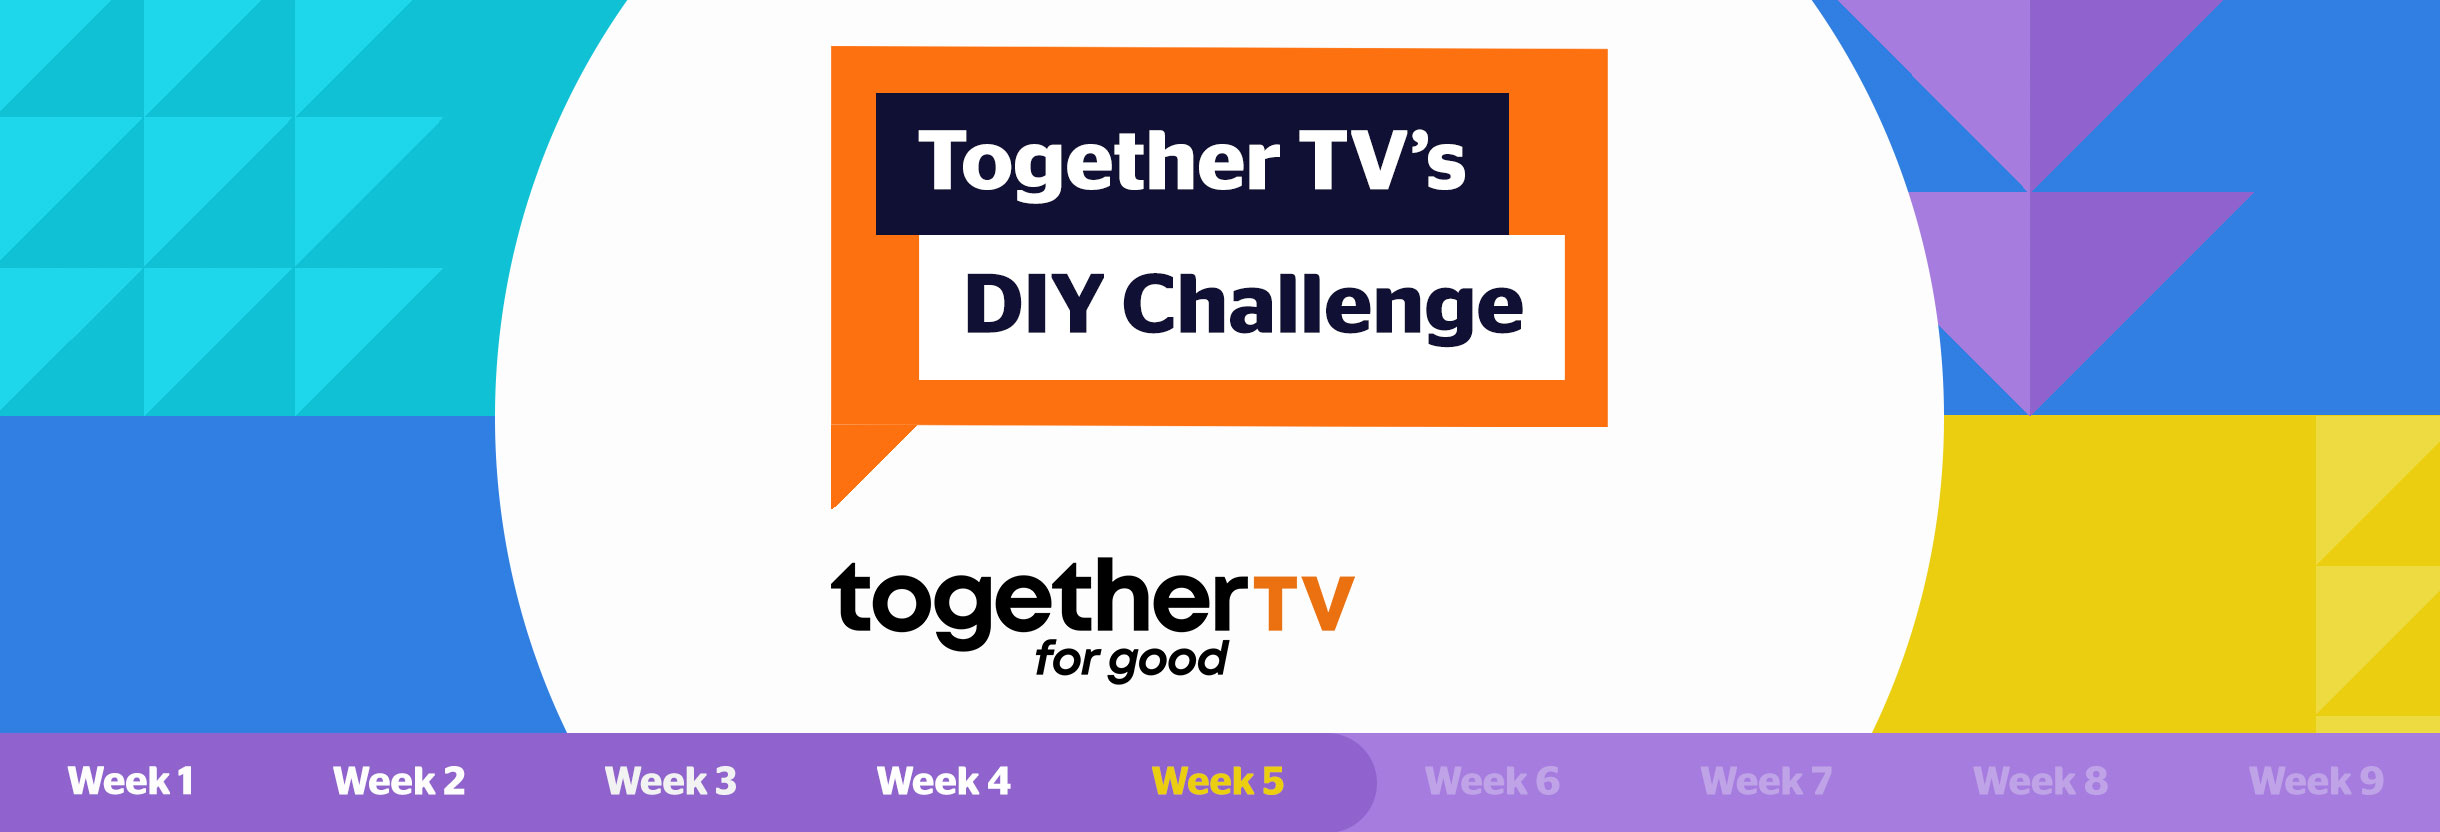 Welcome to Week 5 of the DIY Challenge